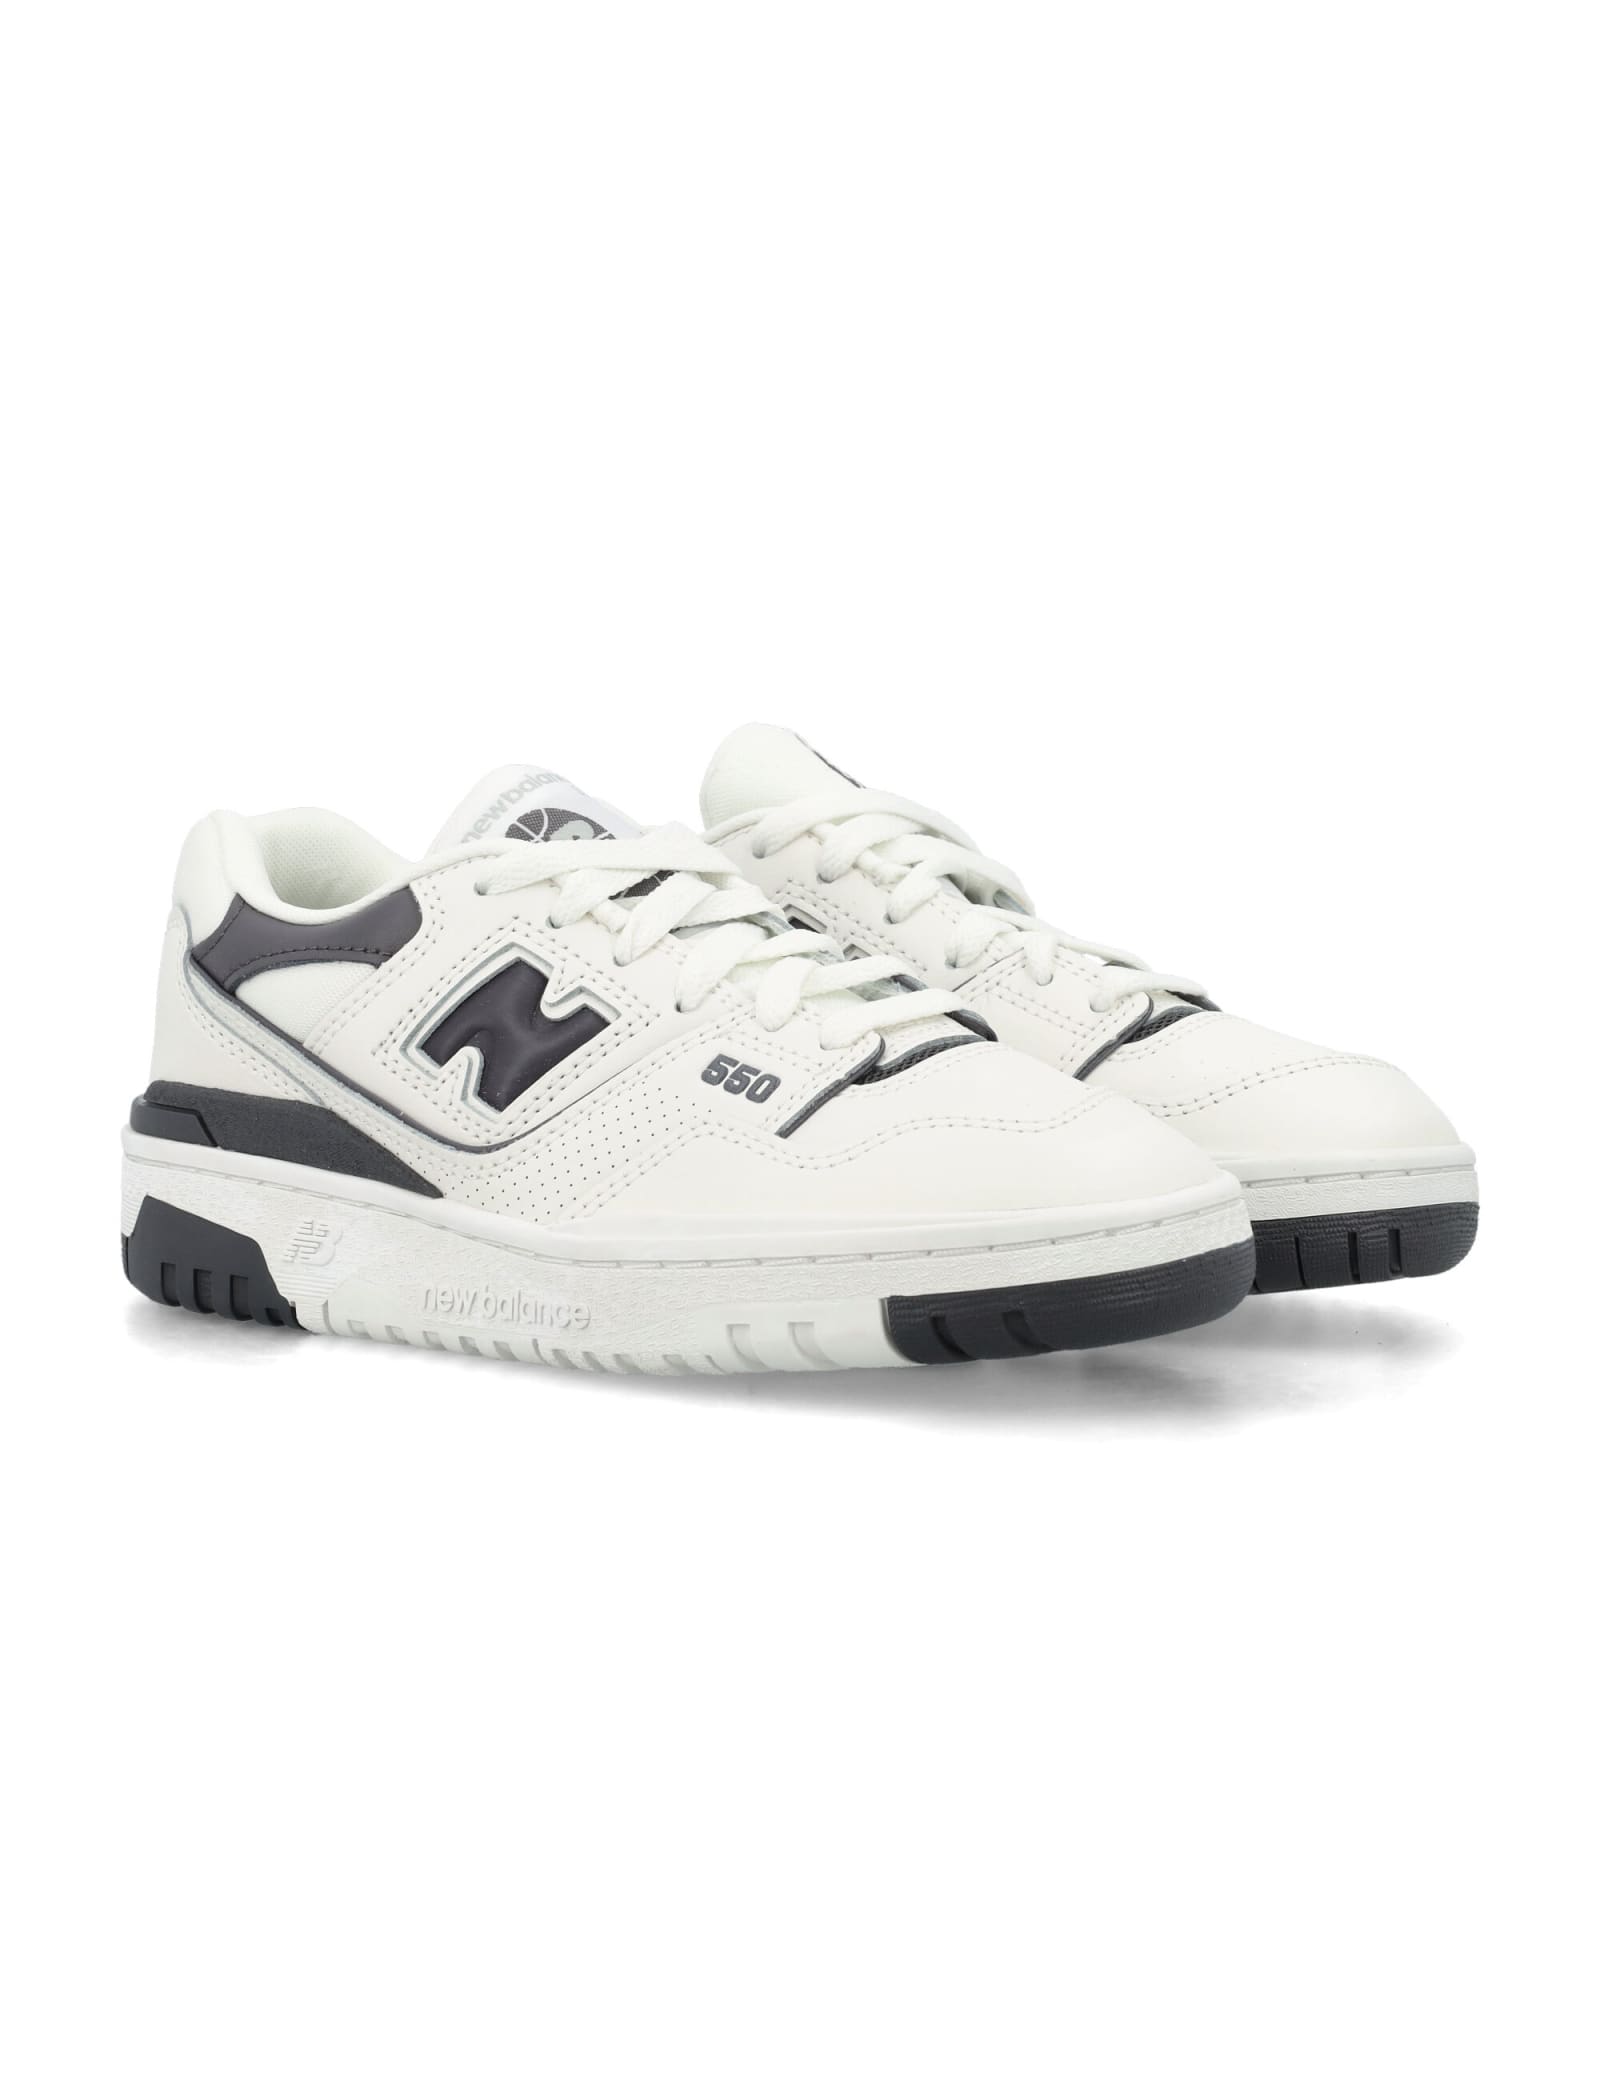 Shop New Balance 550 Sneakers In Black/white